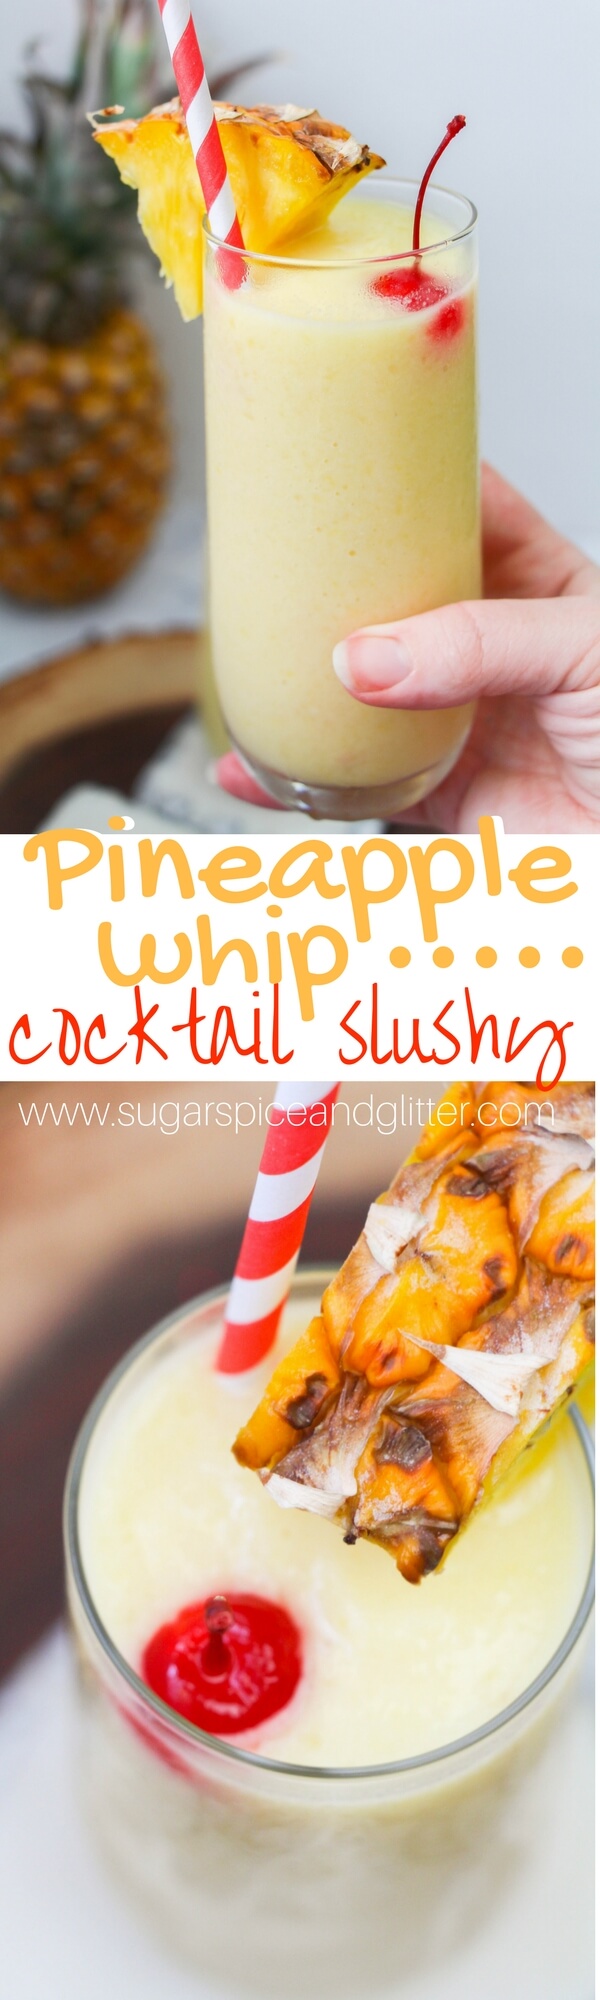 A delicious and refreshing pineapple slushy cocktail - a fun twist on Disney's dole whip recipe - with rum!